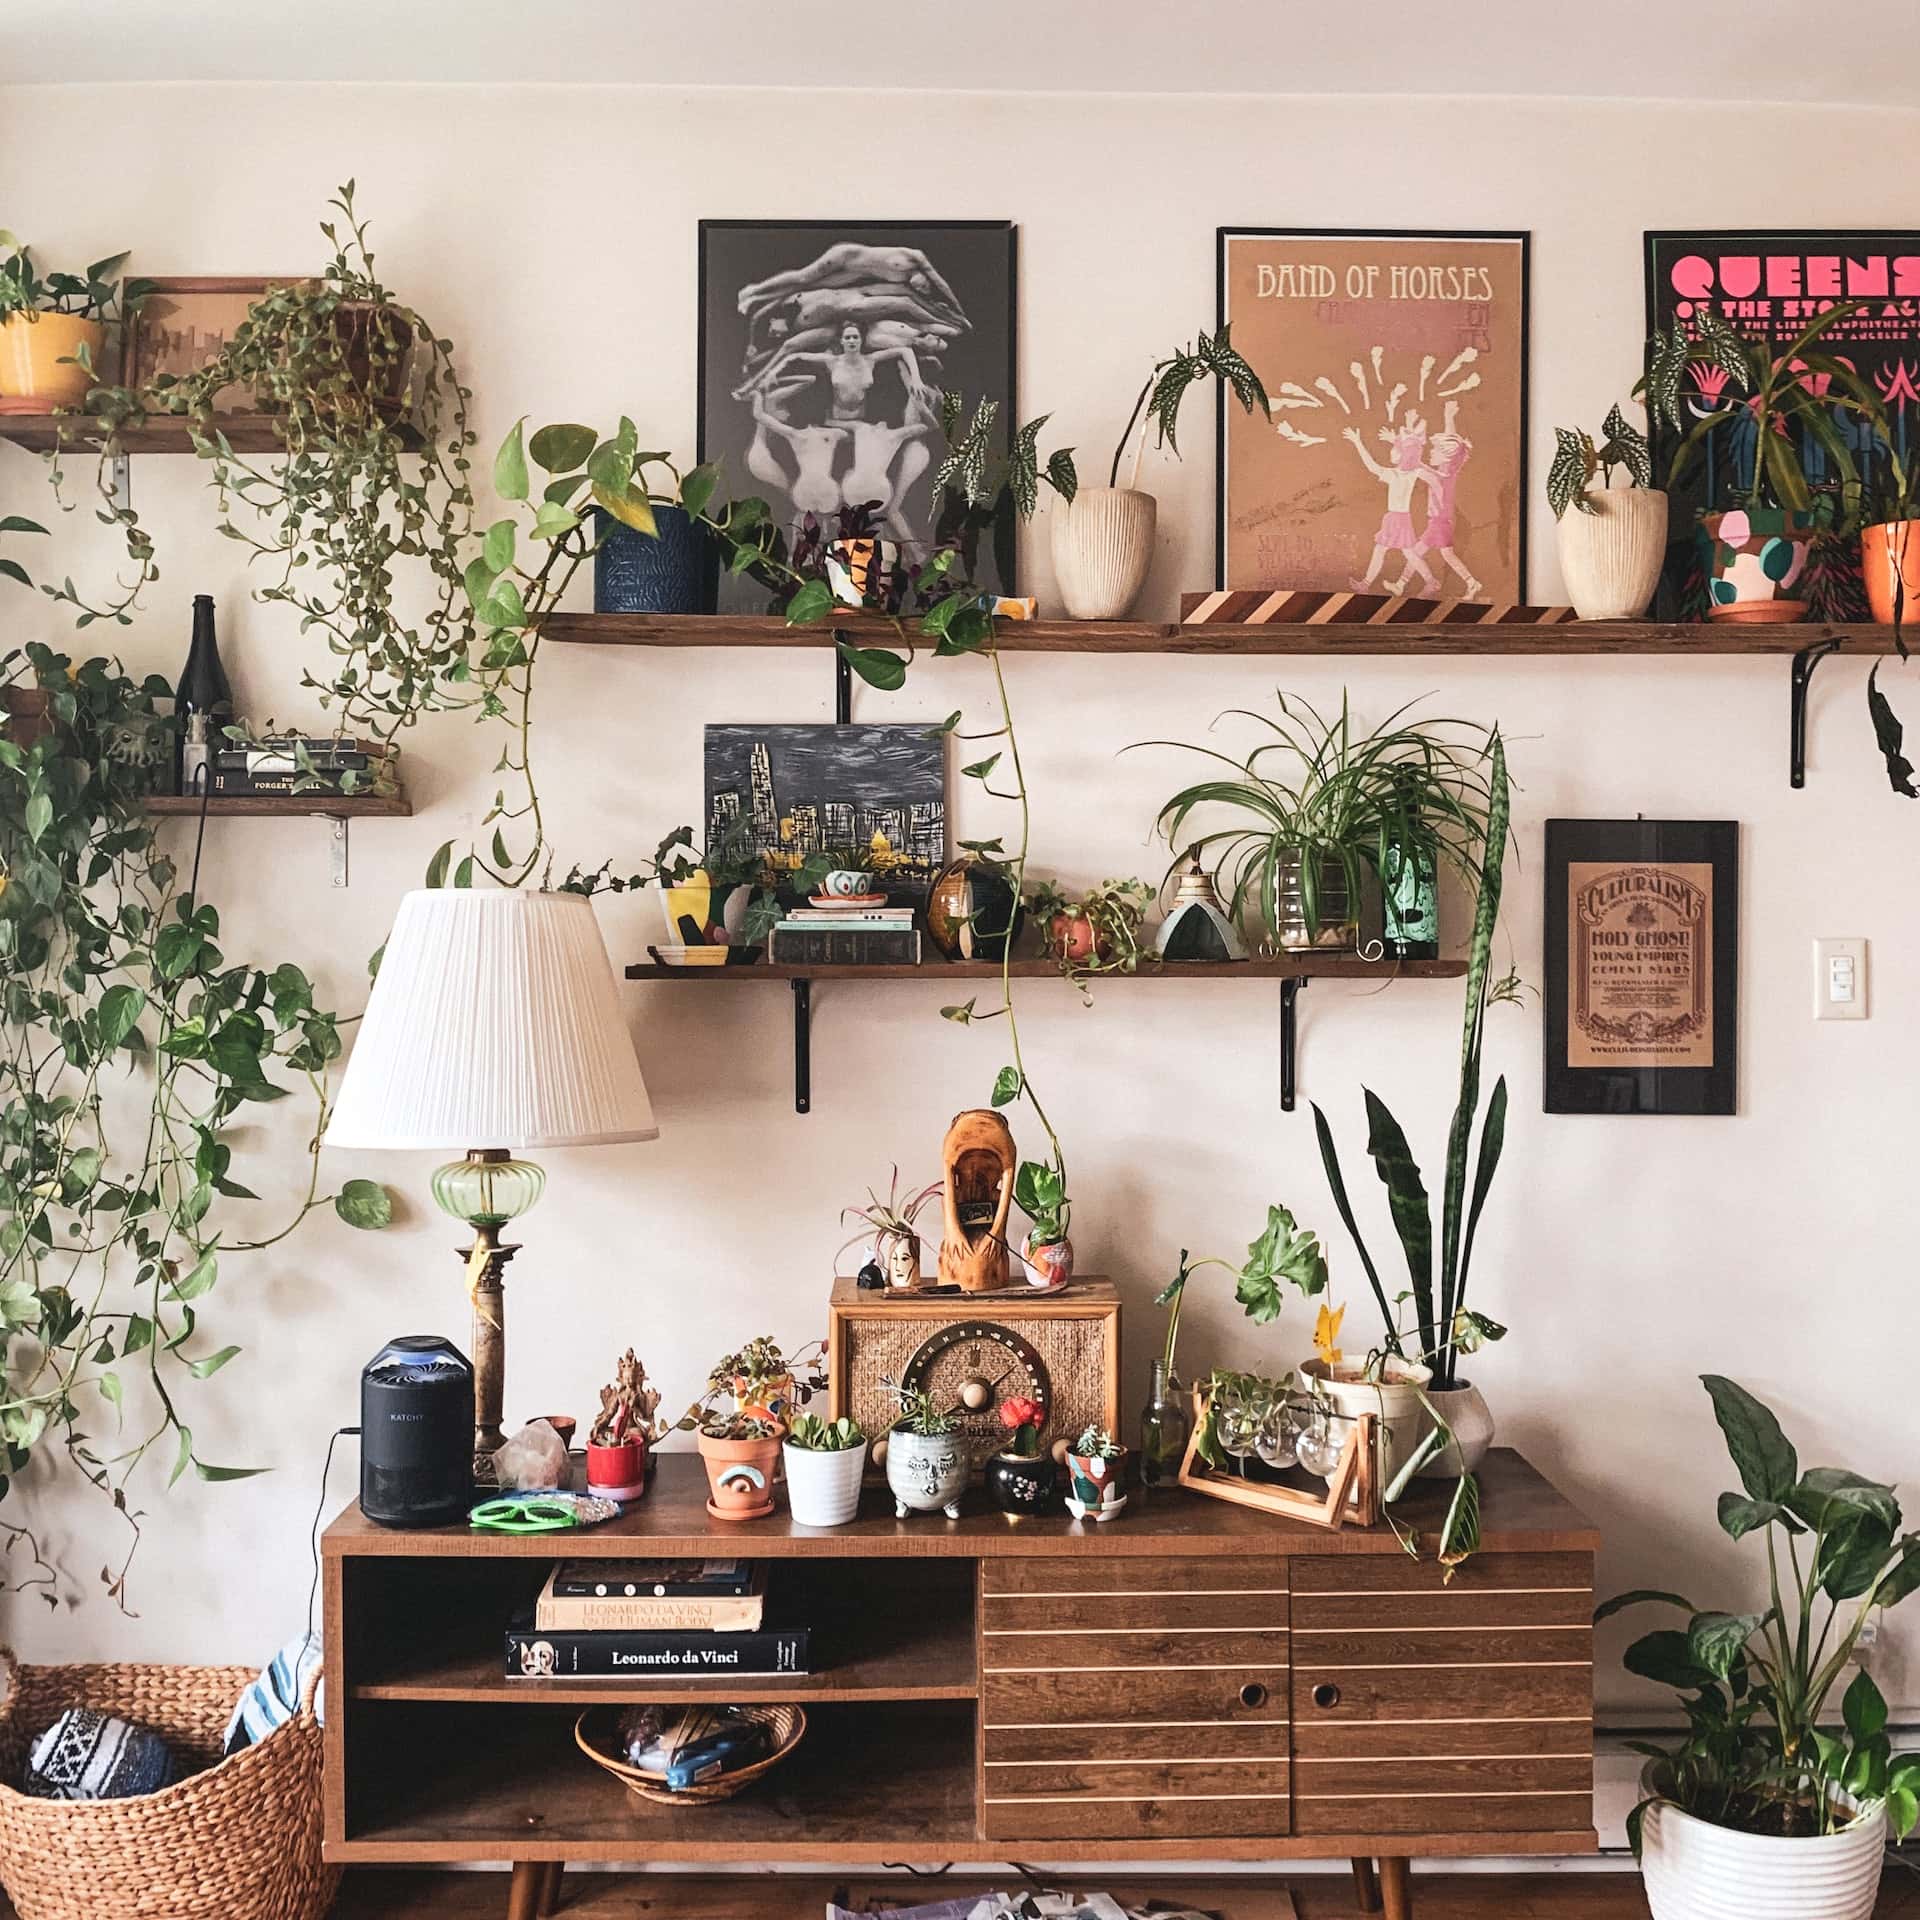 7 Storage Ideas to Steal from This 600-Square-Foot Apartment